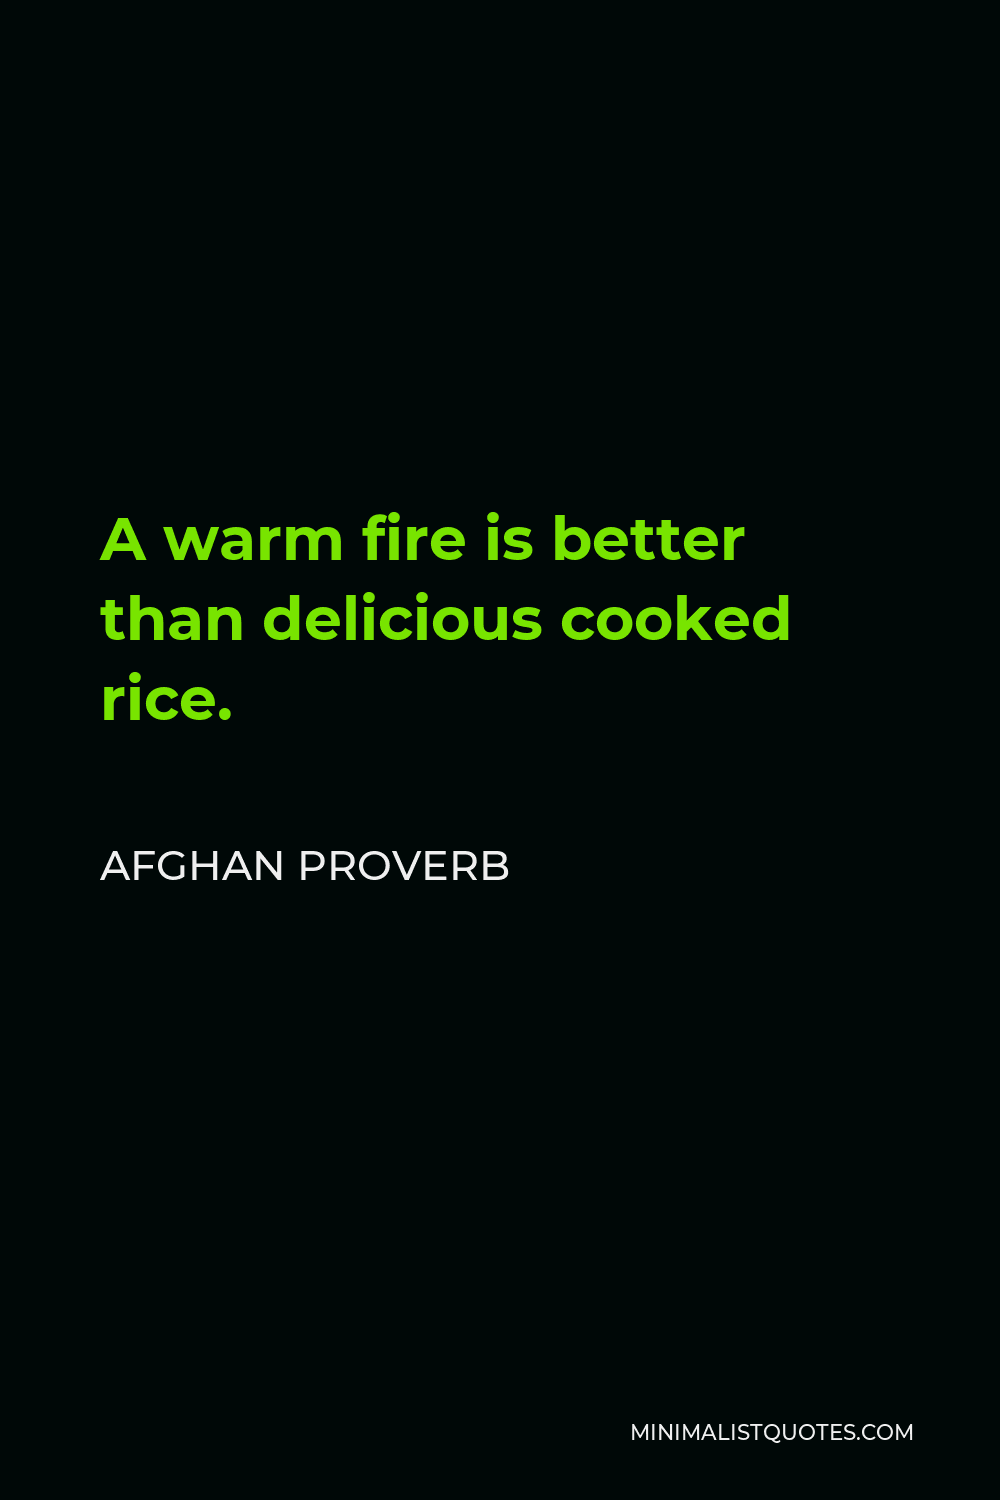 Afghan Proverb Quote - A warm fire is better than delicious cooked rice.